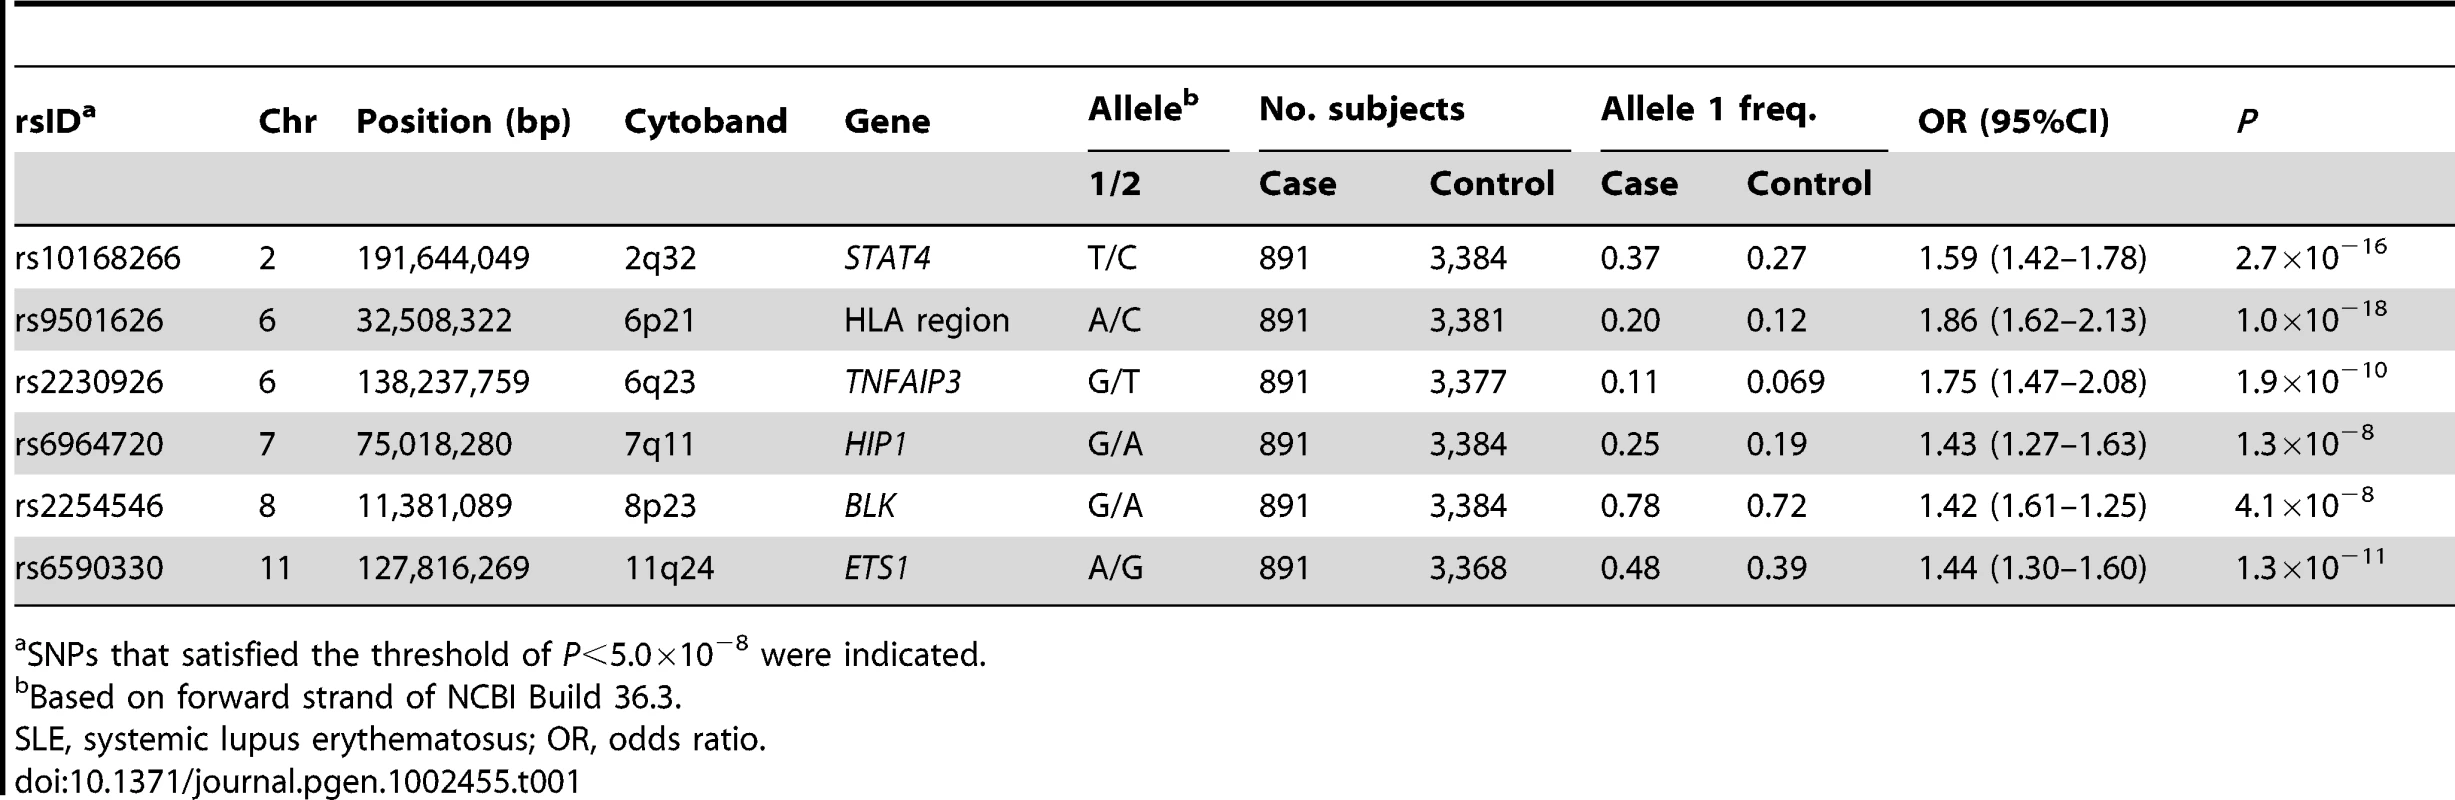 Results of a genome-wide association study for Japanese patients with SLE.